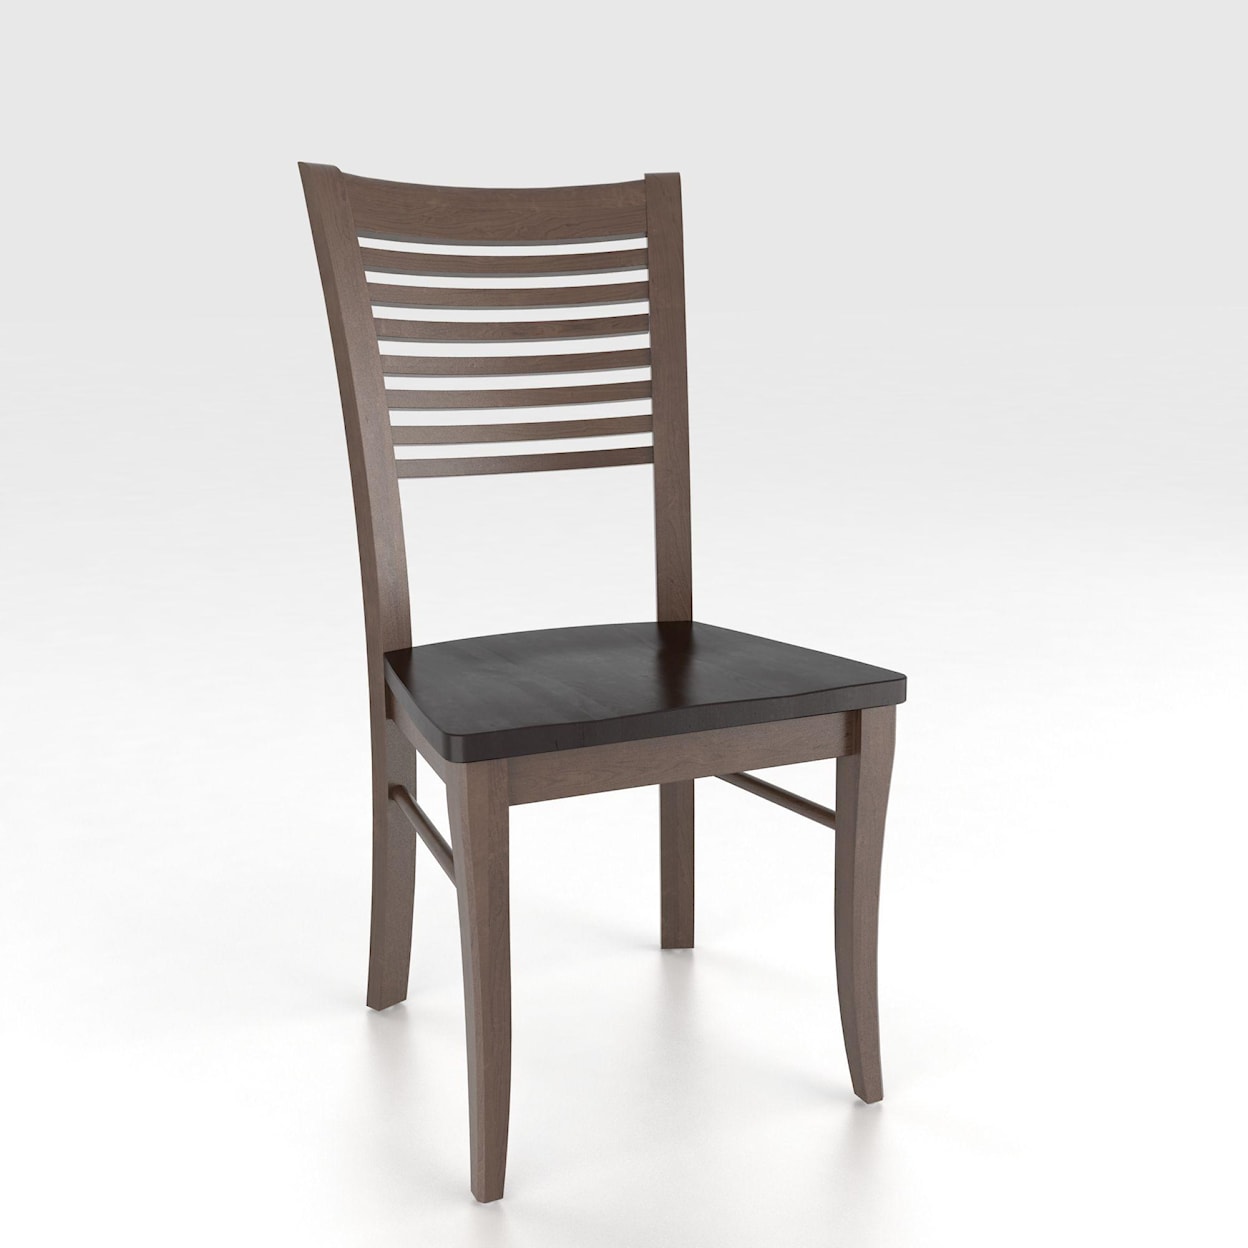 Canadel Canadel Side Chair